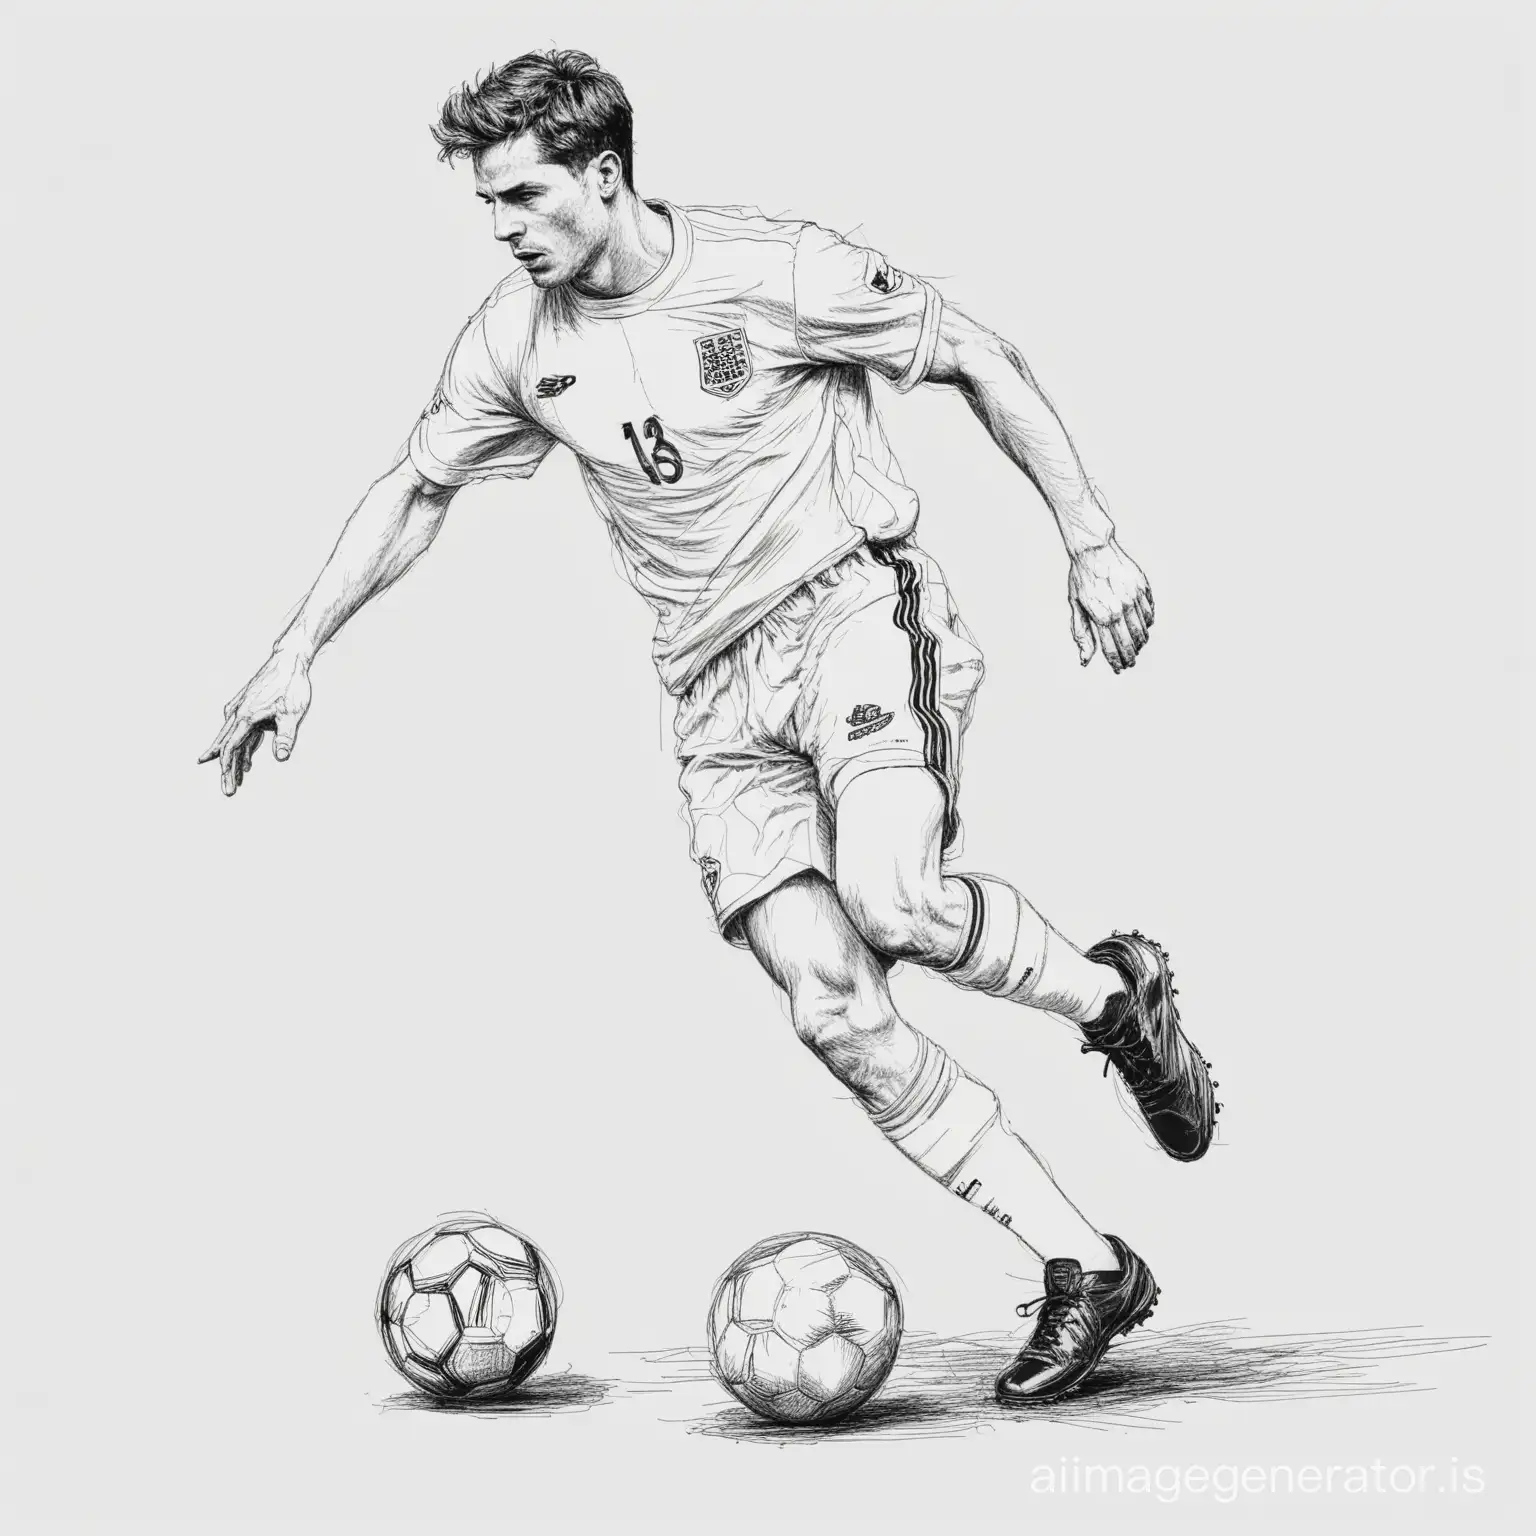 English-Soccer-Player-in-Action-with-Ball